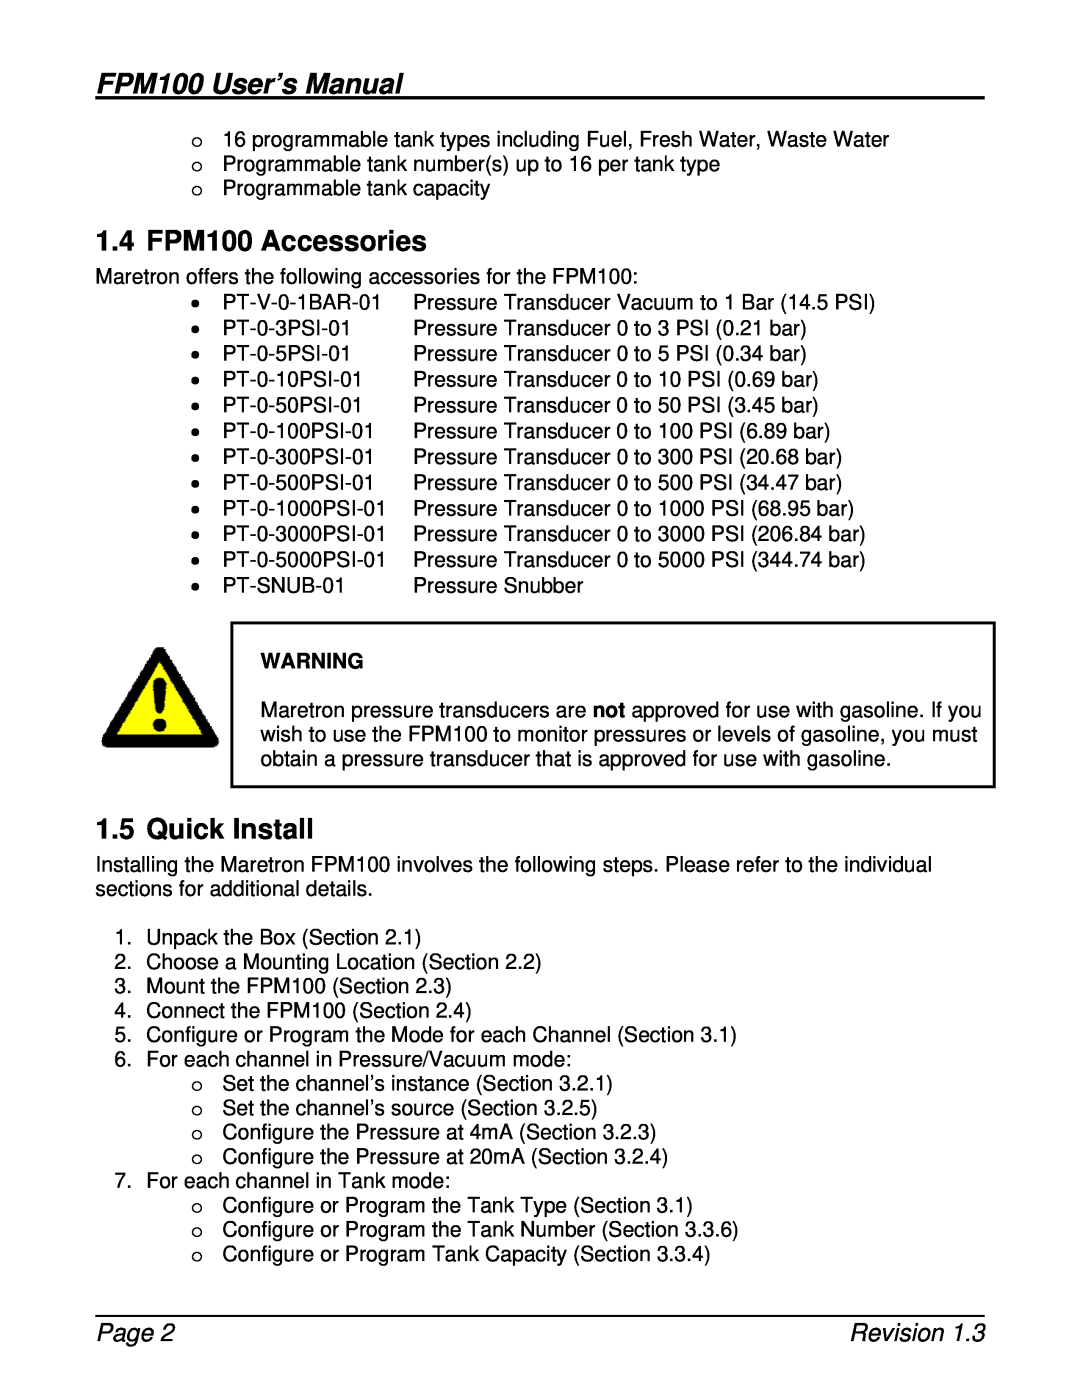 Maretron user manual 1.4 FPM100 Accessories, Quick Install, FPM100 User’s Manual, Page, Revision 